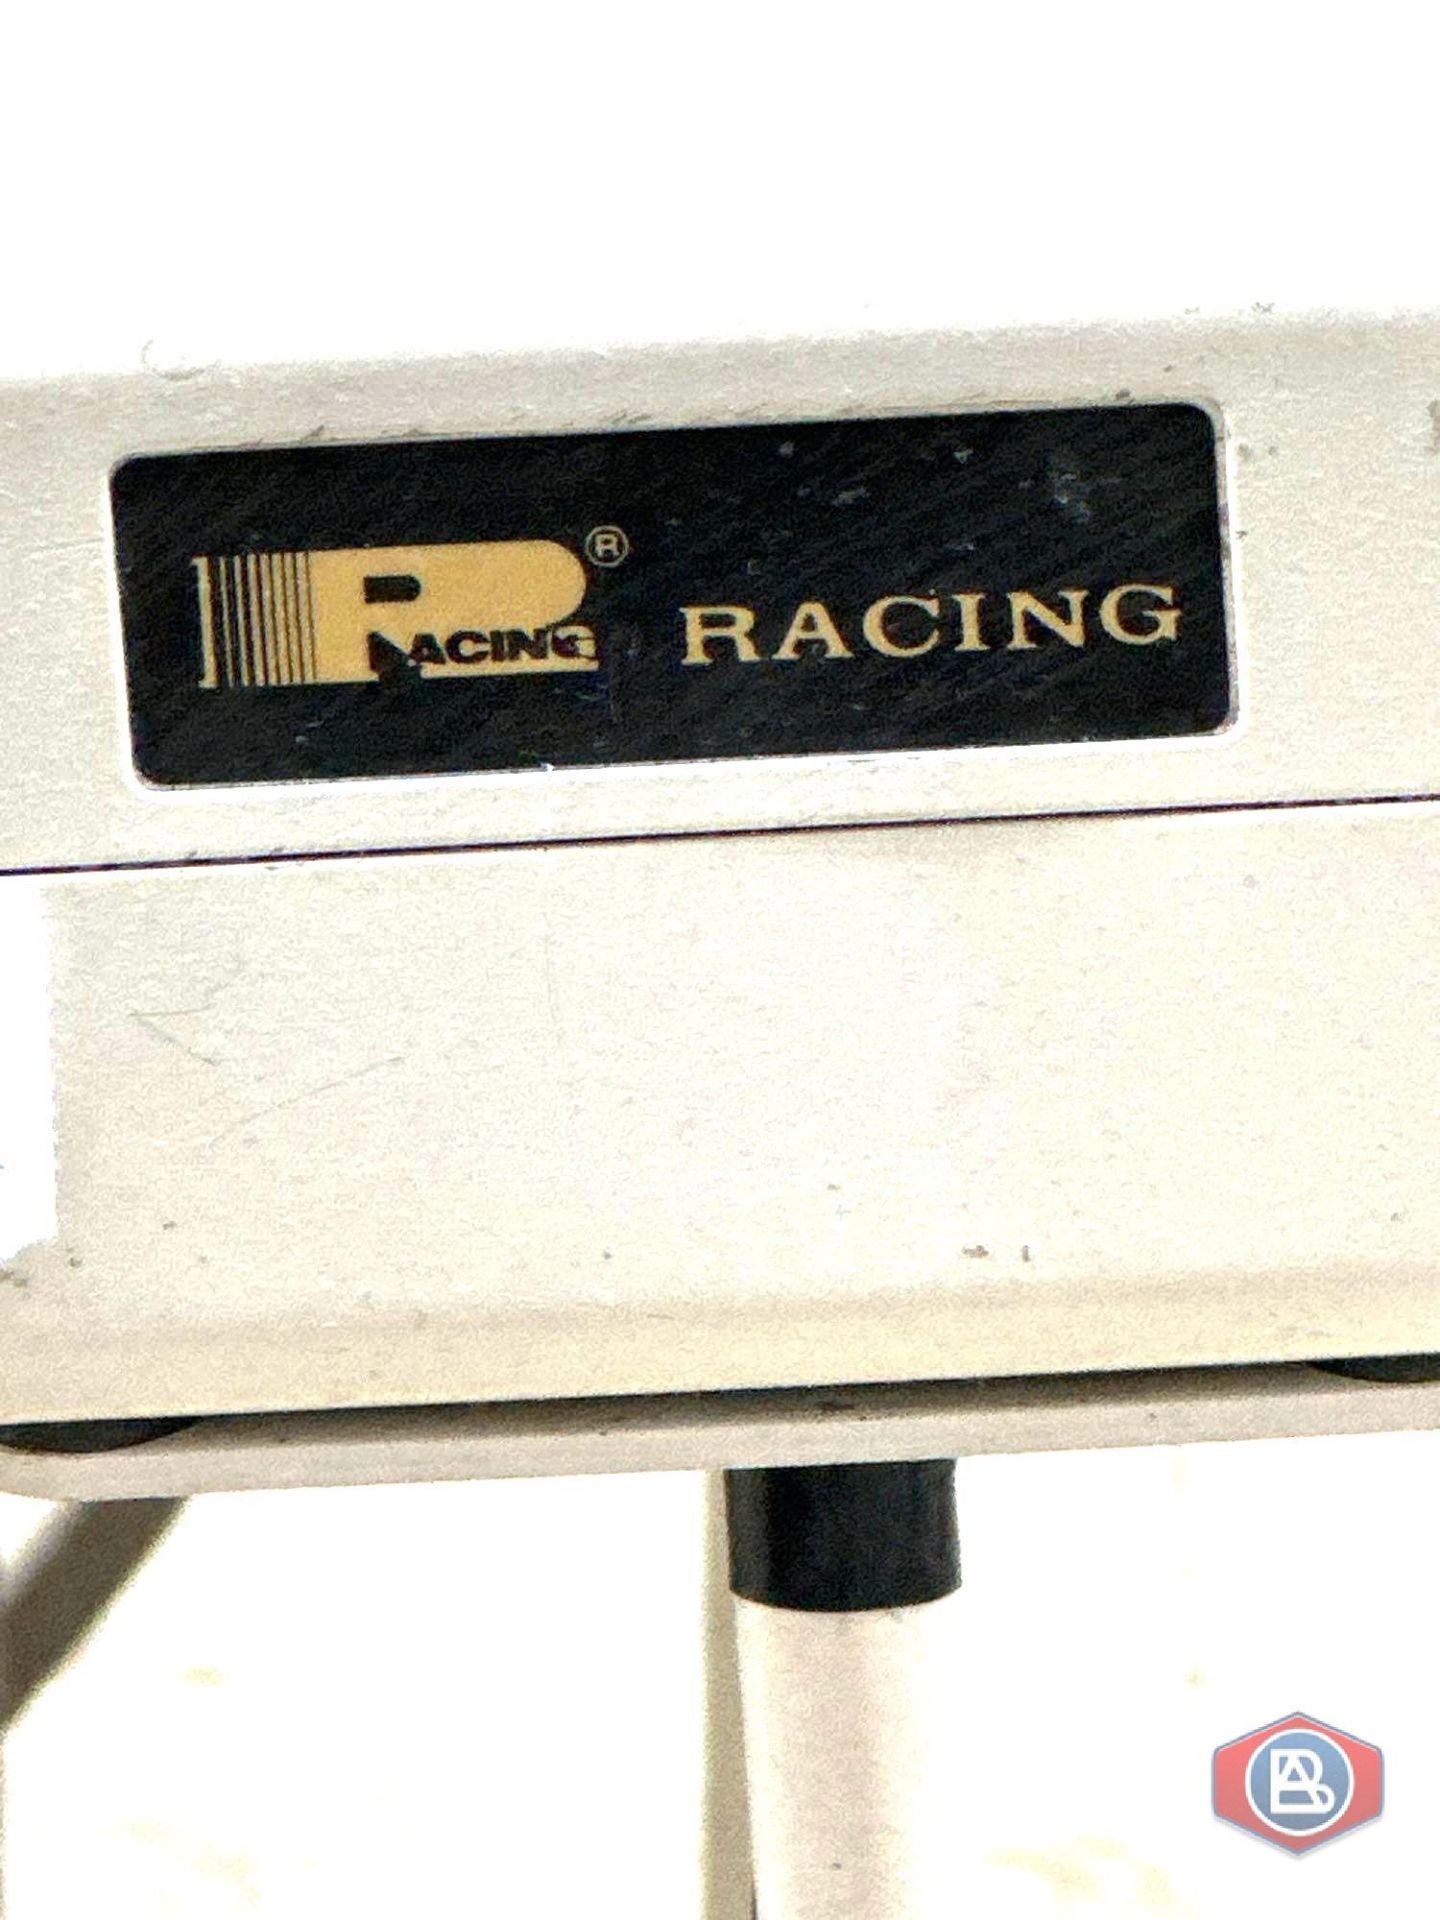 Racing Sewing Company Upper Tape Feeders - Image 4 of 7